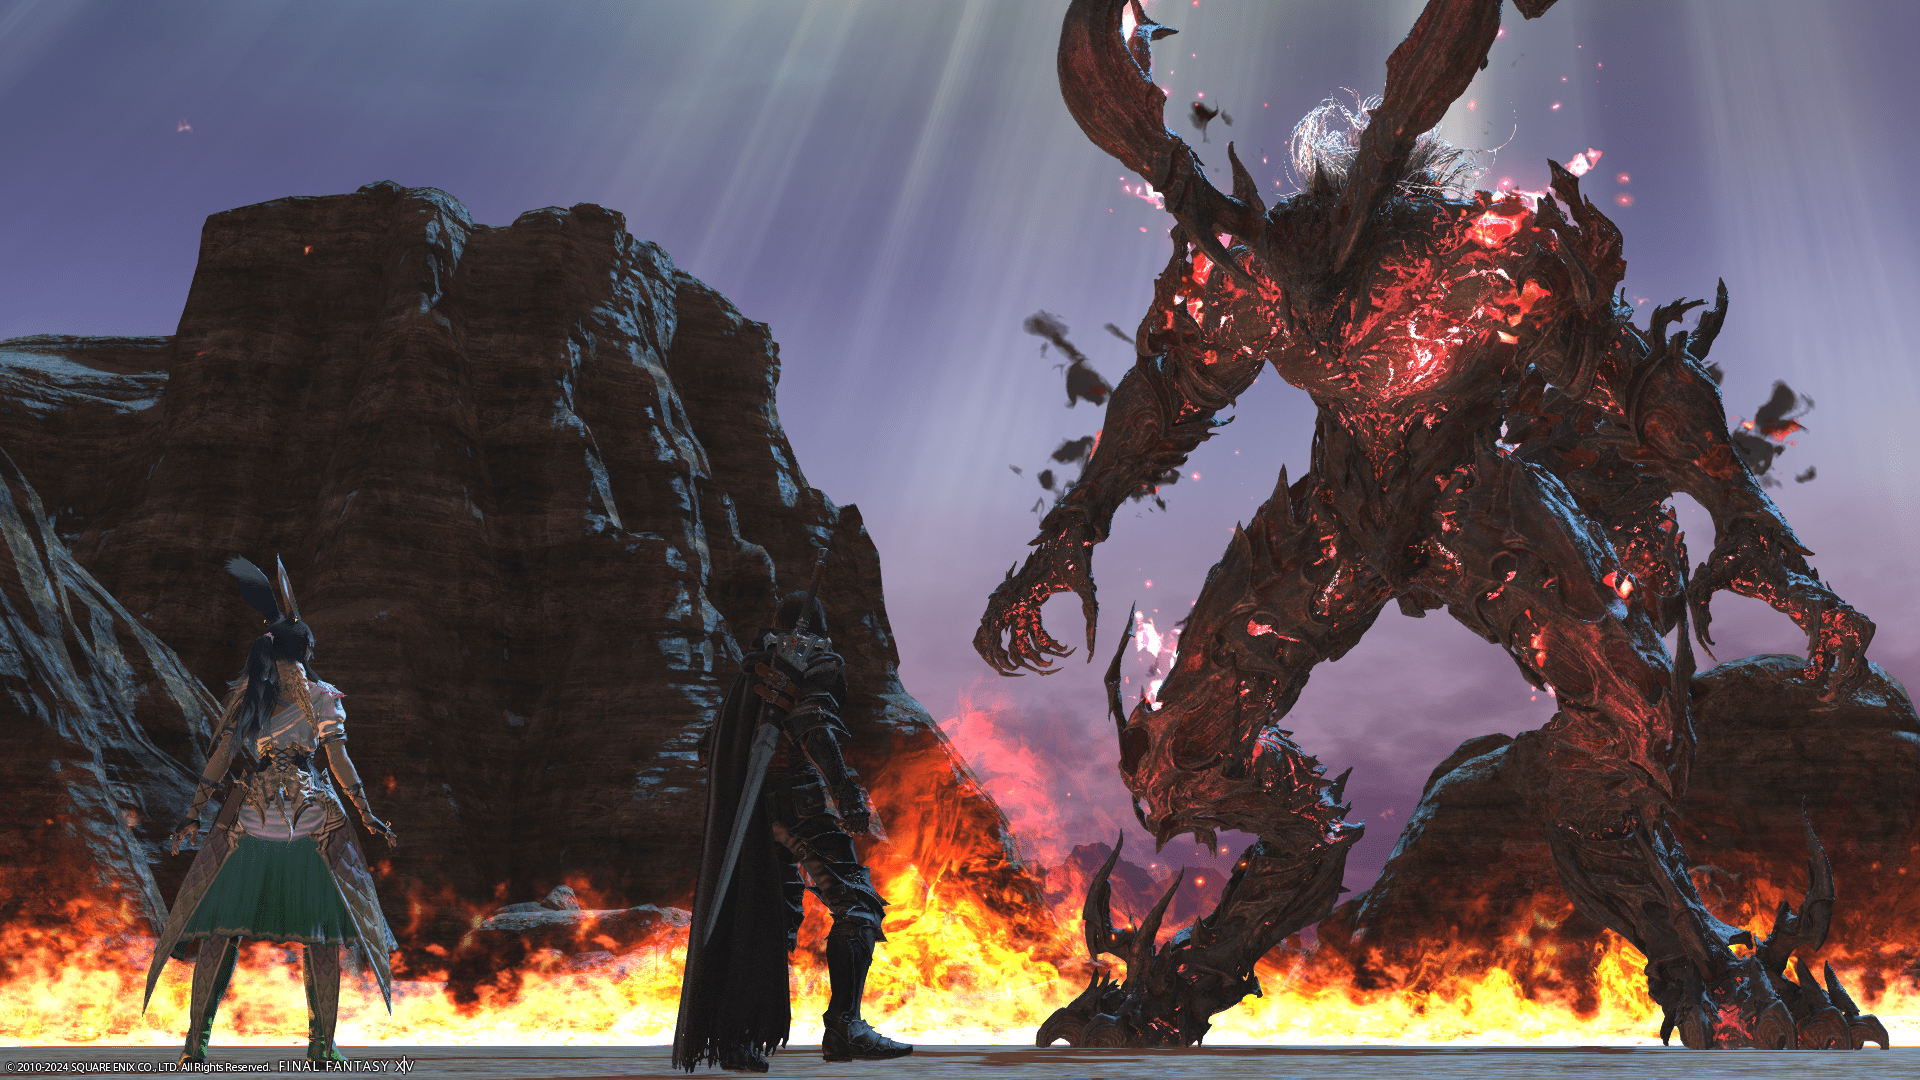 Clive and I staring down a colossal version of Ifrit.